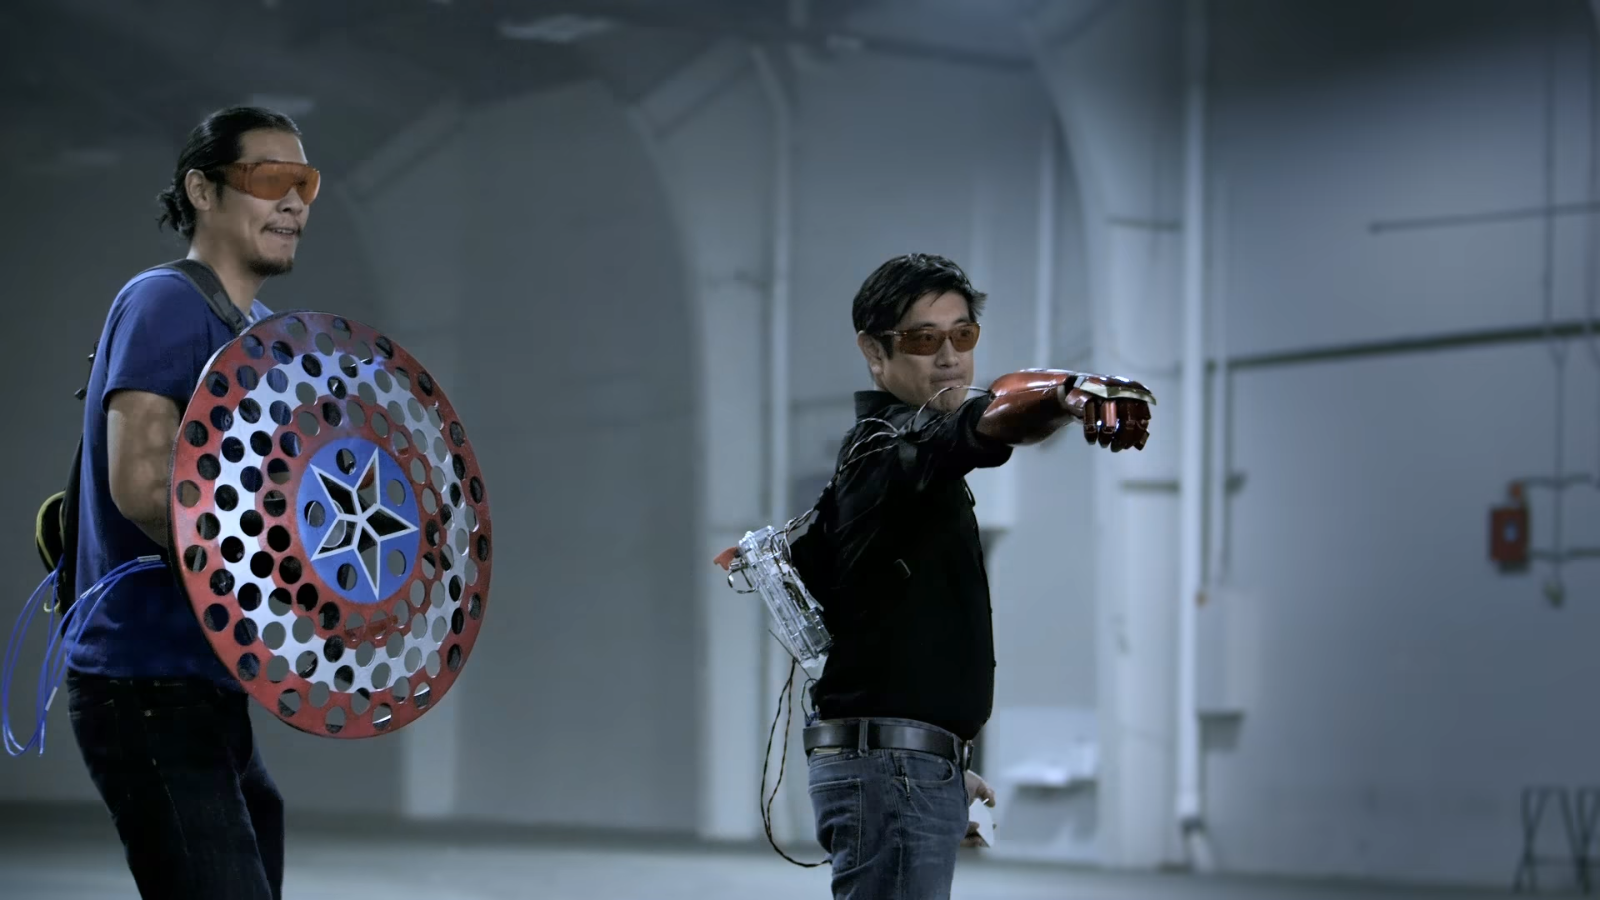 Allen Pan and grant Umehara are holding recreations of comic book weapons they made. Allen is holding a Captain America flying shield drone, and Grant is holding a Iron Man laser arm.